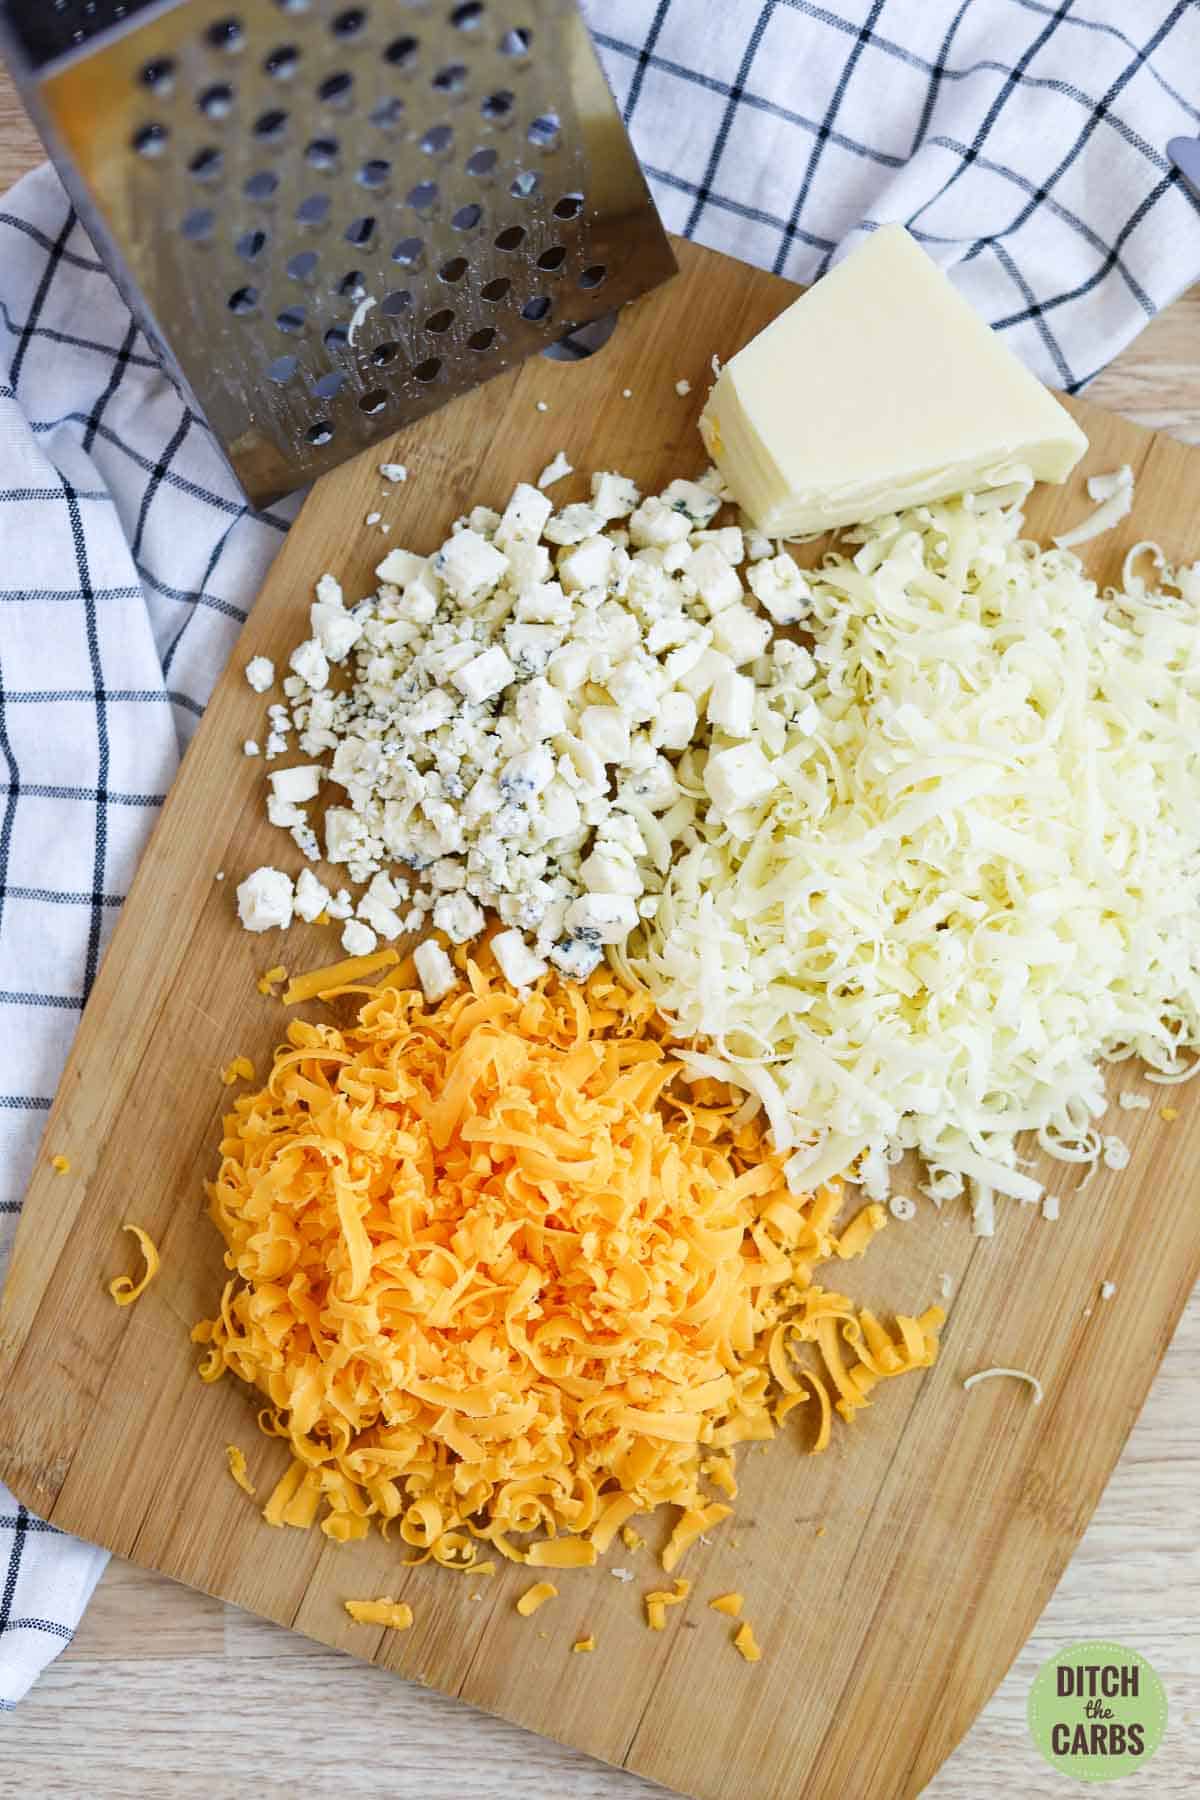 Cheddar, mozzarella, and blue cheese shredded and crumbled on a cutting board.